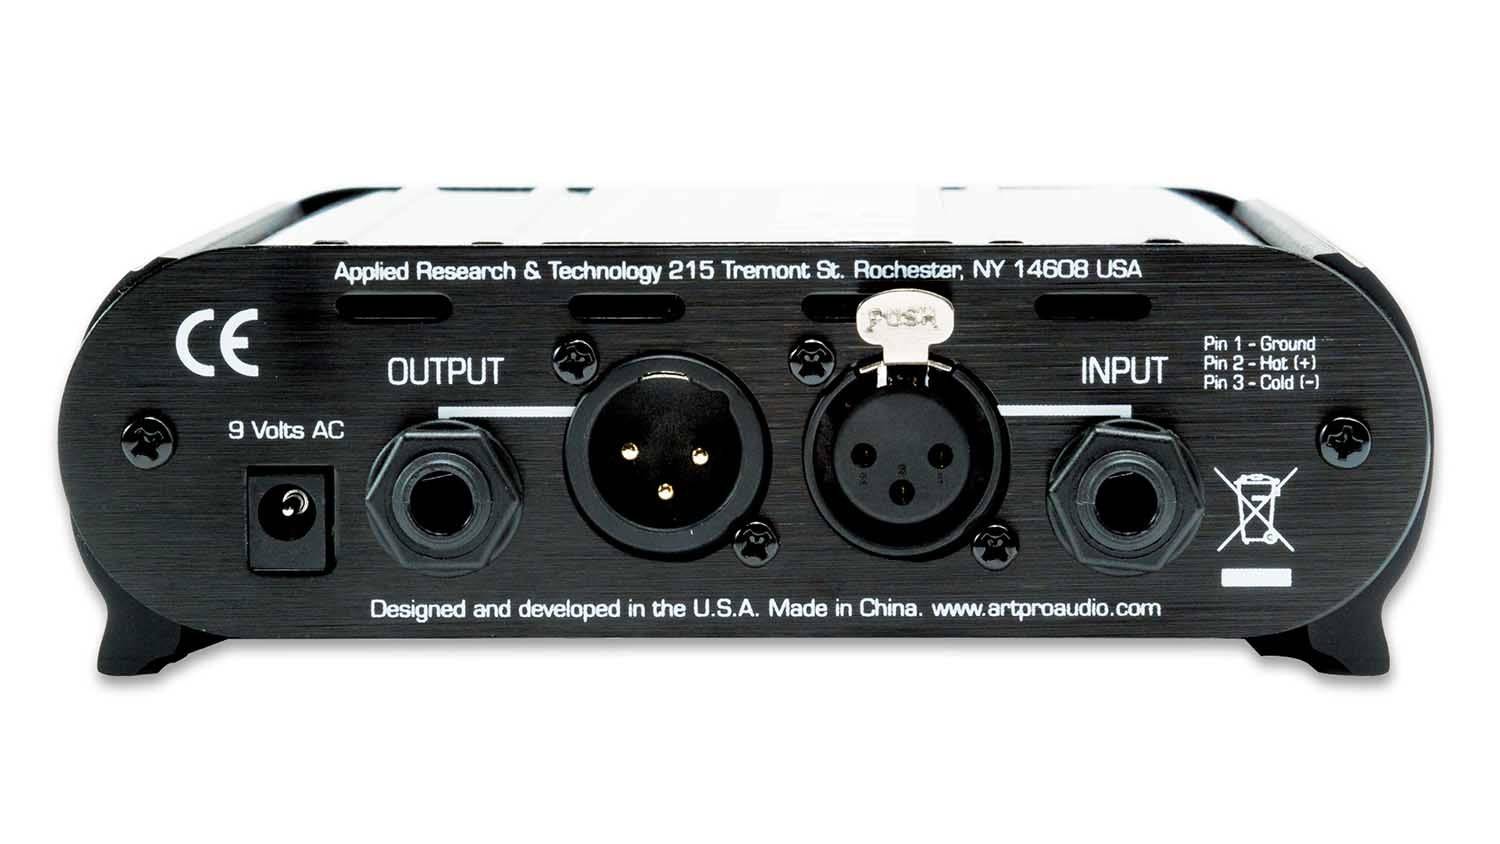 ART Pro Audio Tube MP Project Series Microphone and Instrument Tube Preamplifier - Hollywood DJ